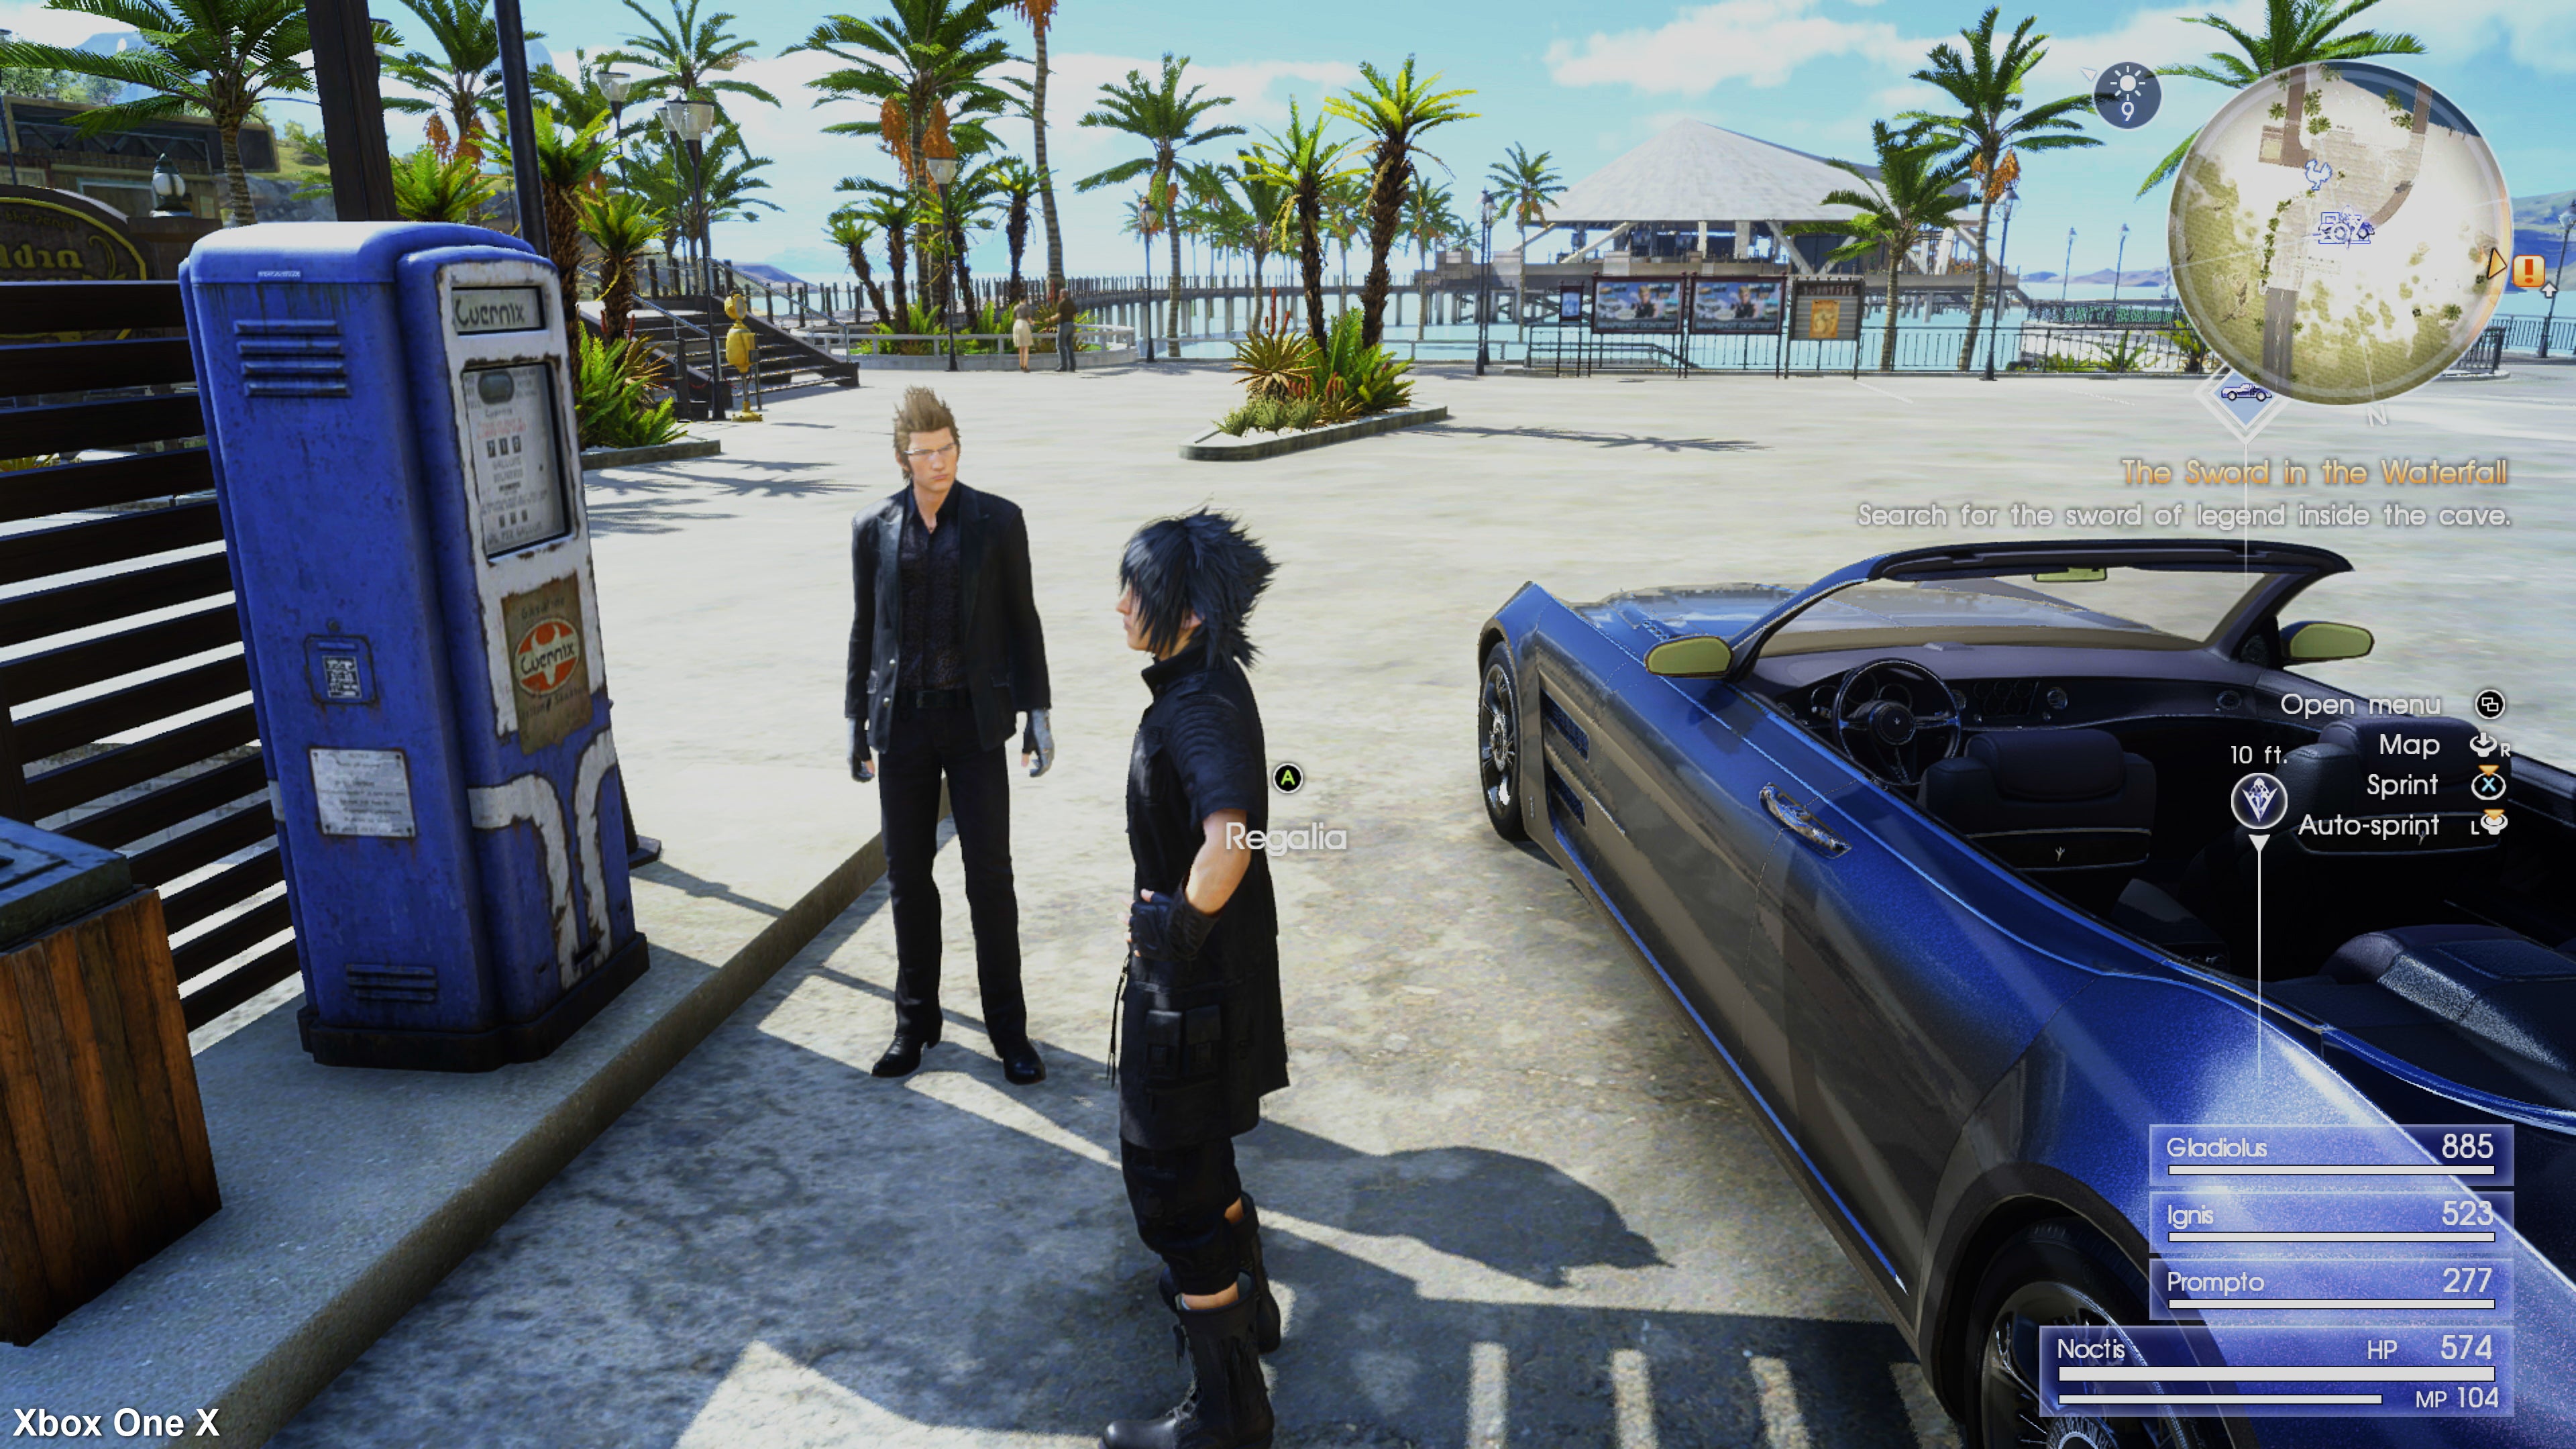 Final Fantasy 15 on Xbox One X: improved over Pro but issues